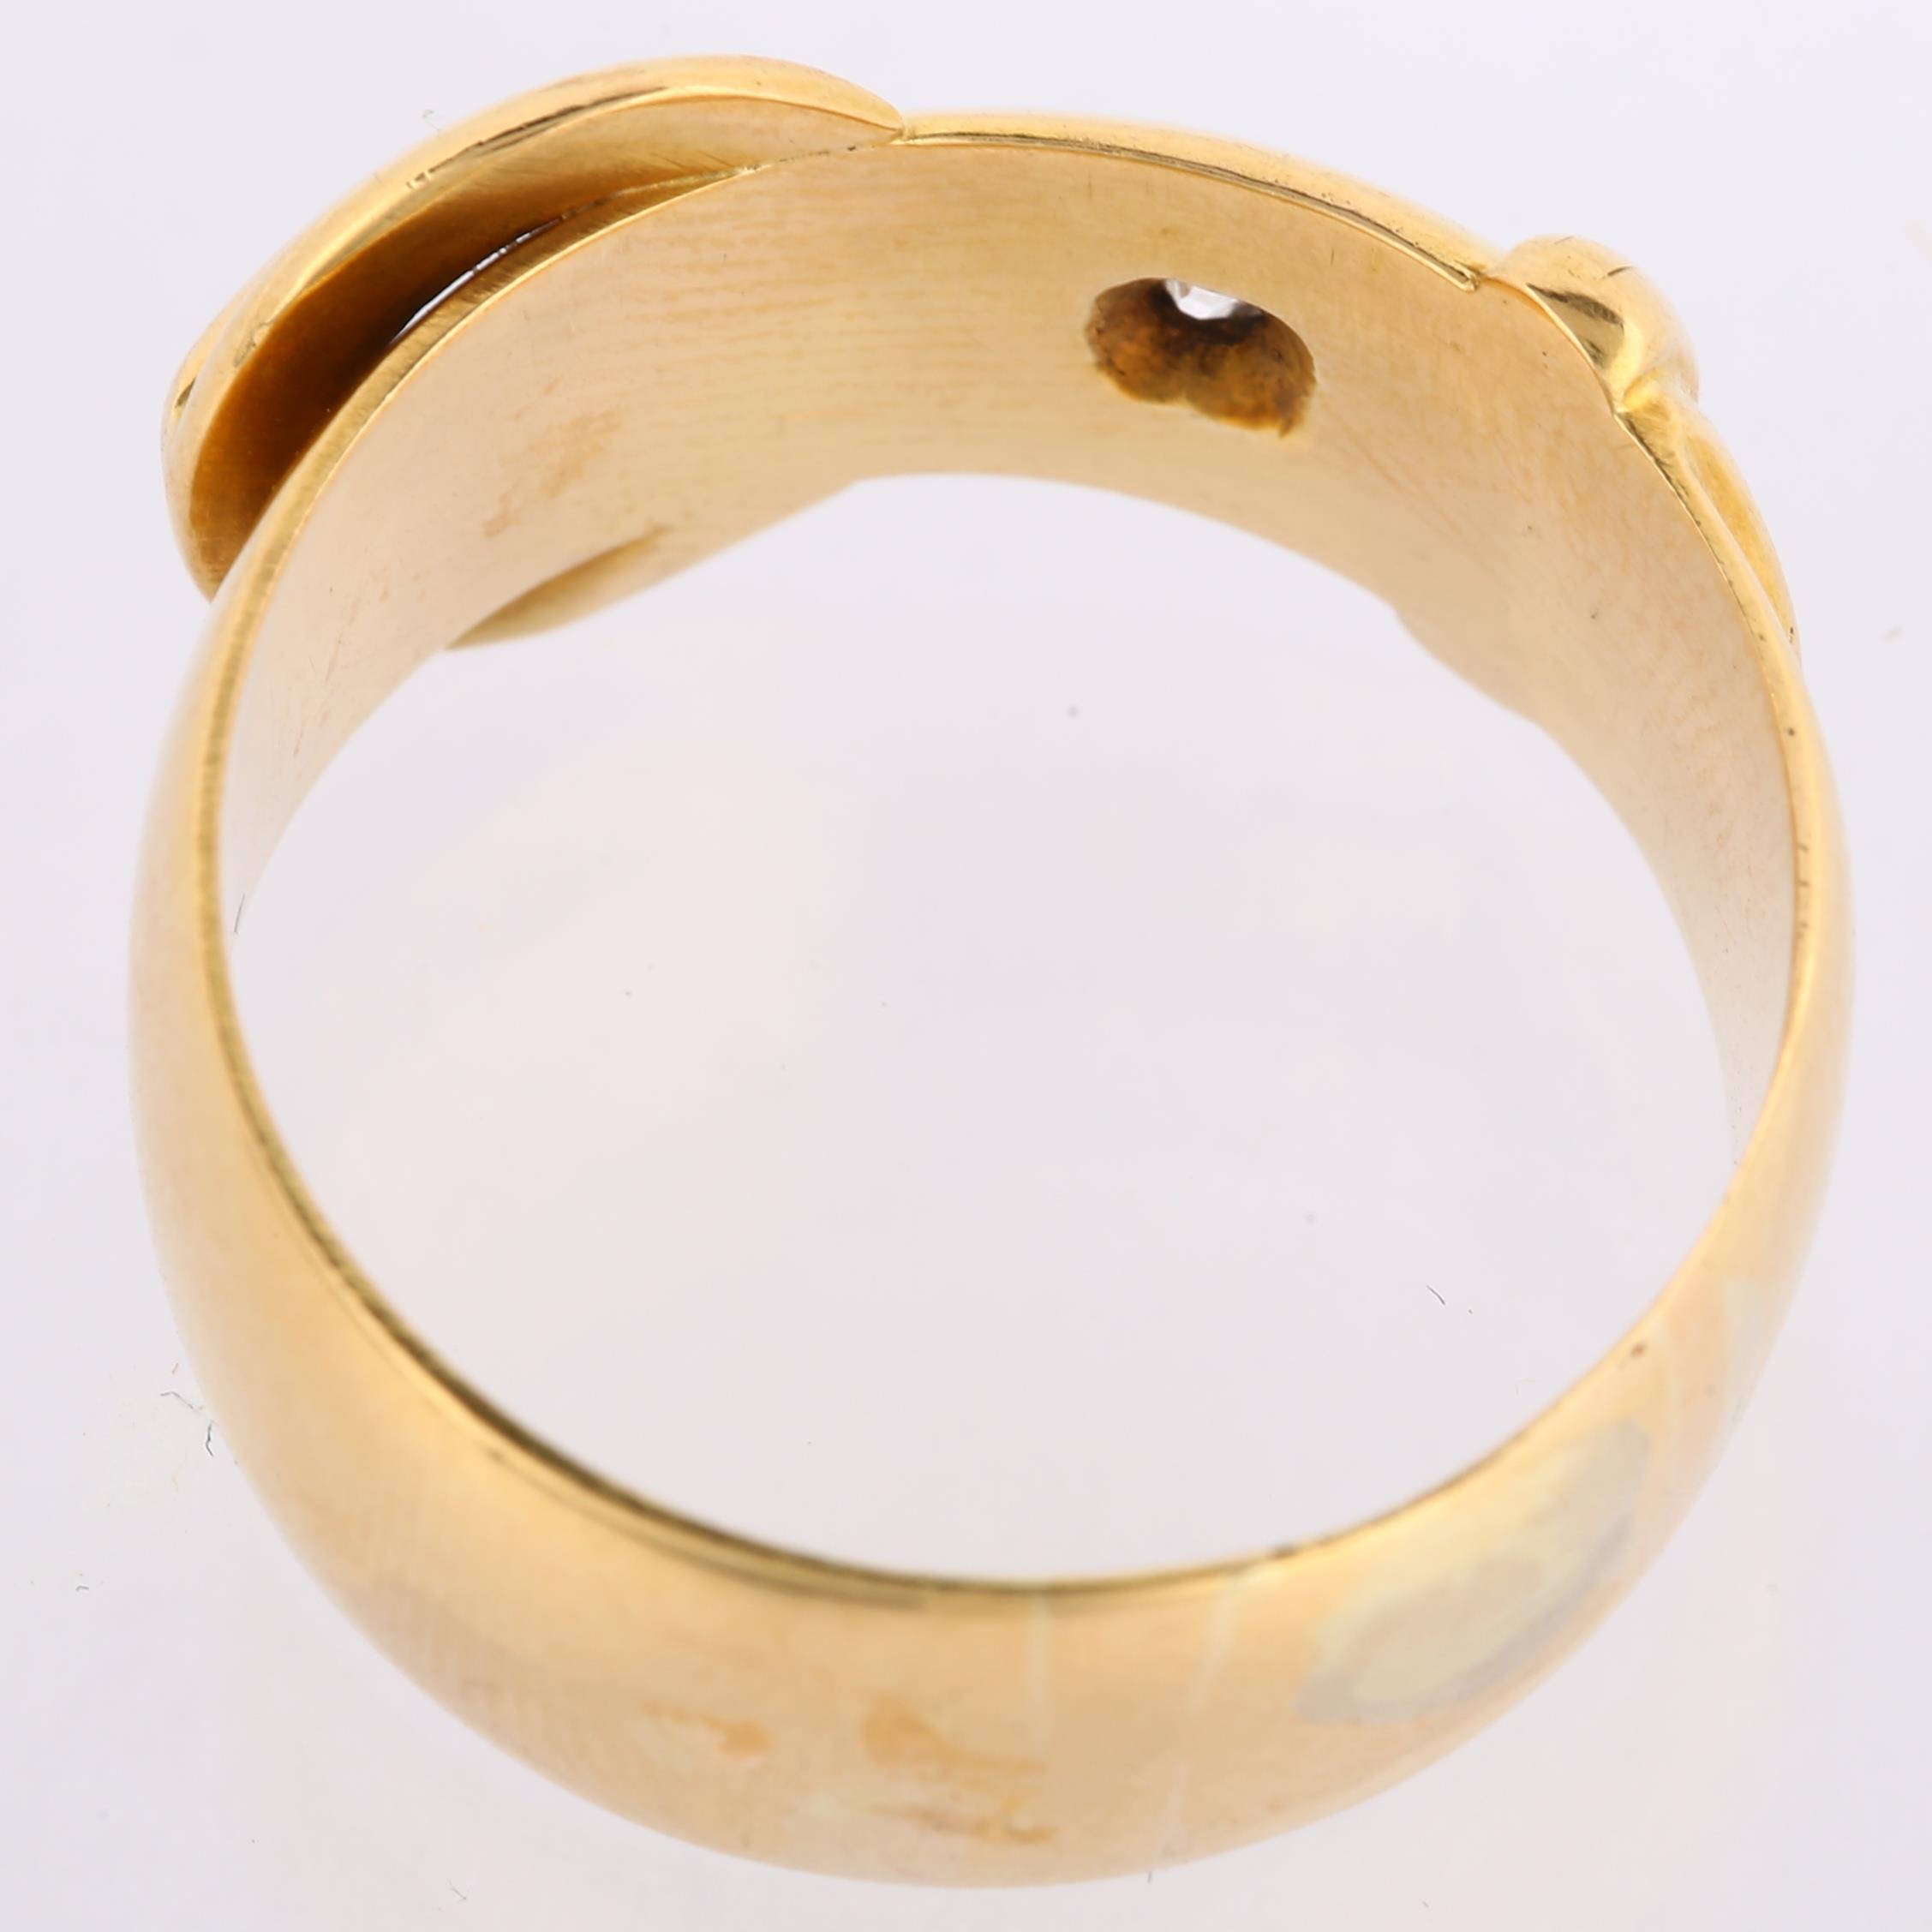 An early 20th century 18ct gold solitaire diamond belt buckle band ring, set with 0.02ct old-cut - Image 3 of 4